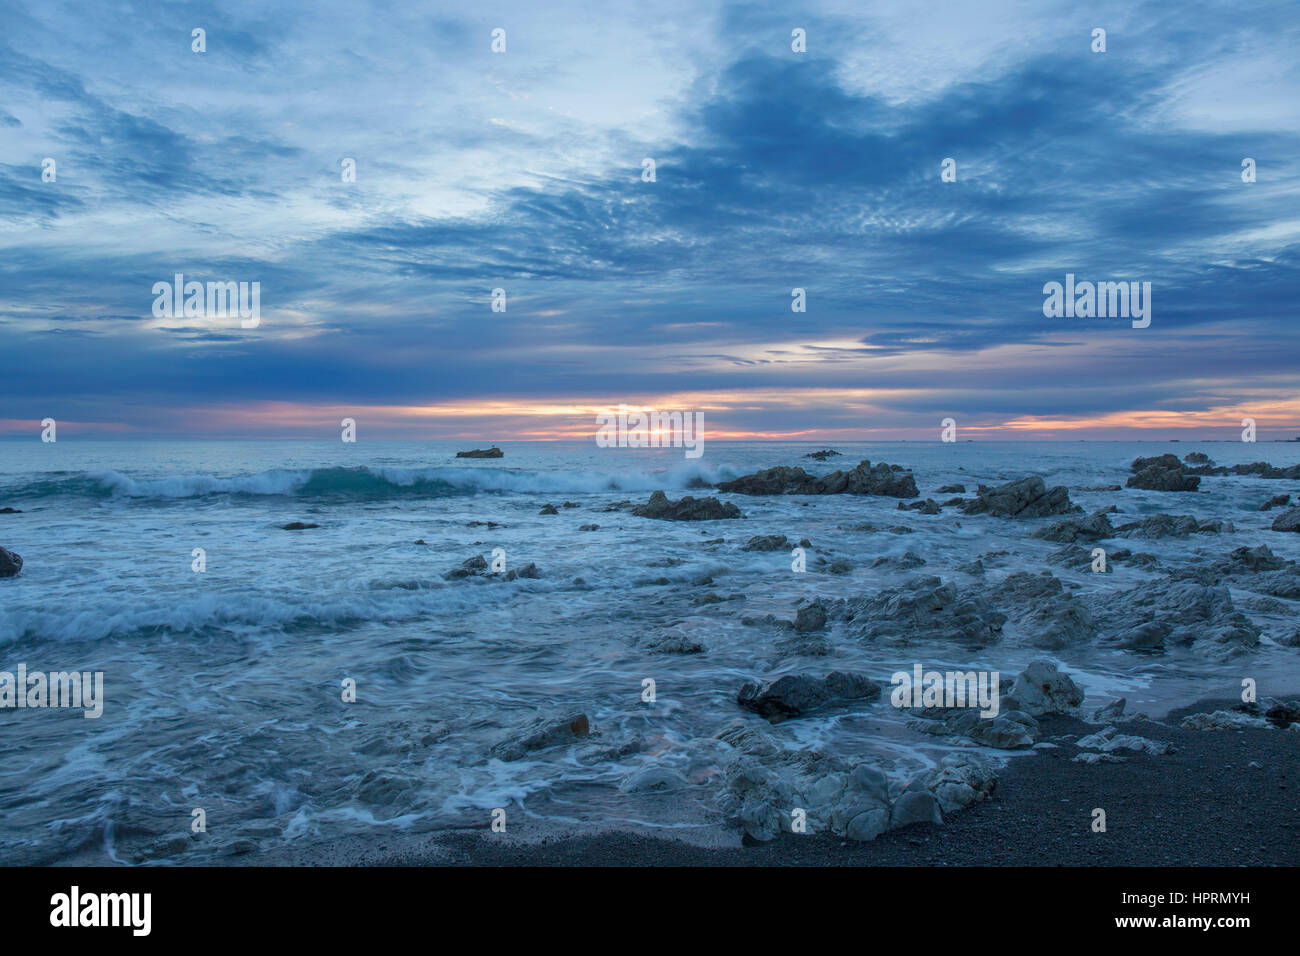 Kaikoura, Canterbury, New Zealand. View across the Pacific Ocean from rocky shoreline at sunrise. Stock Photo